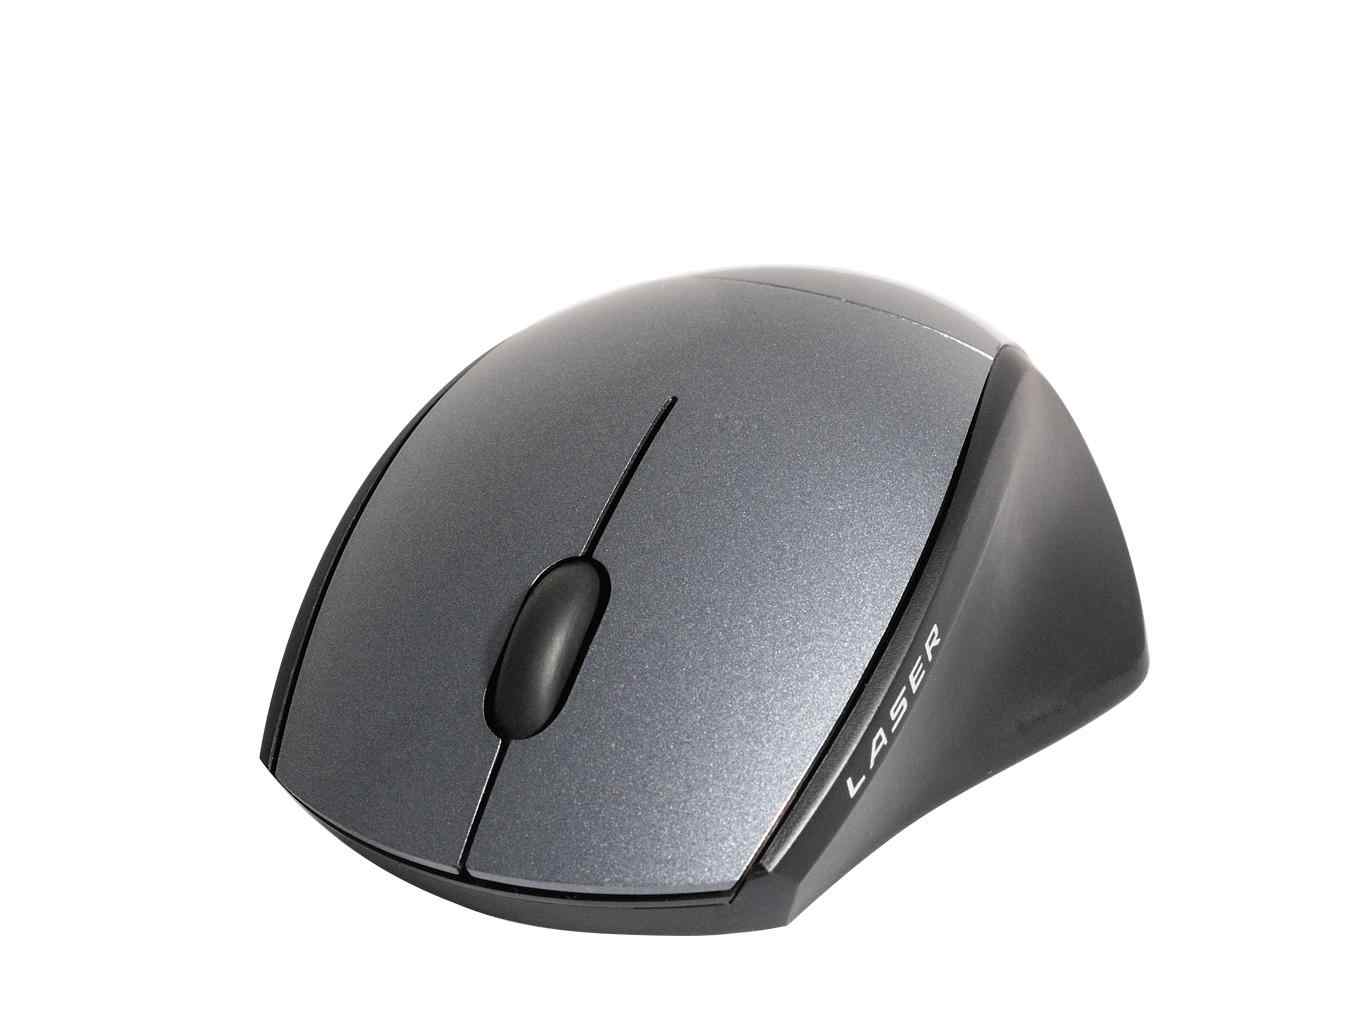 Ngs Vip Laser Mouse